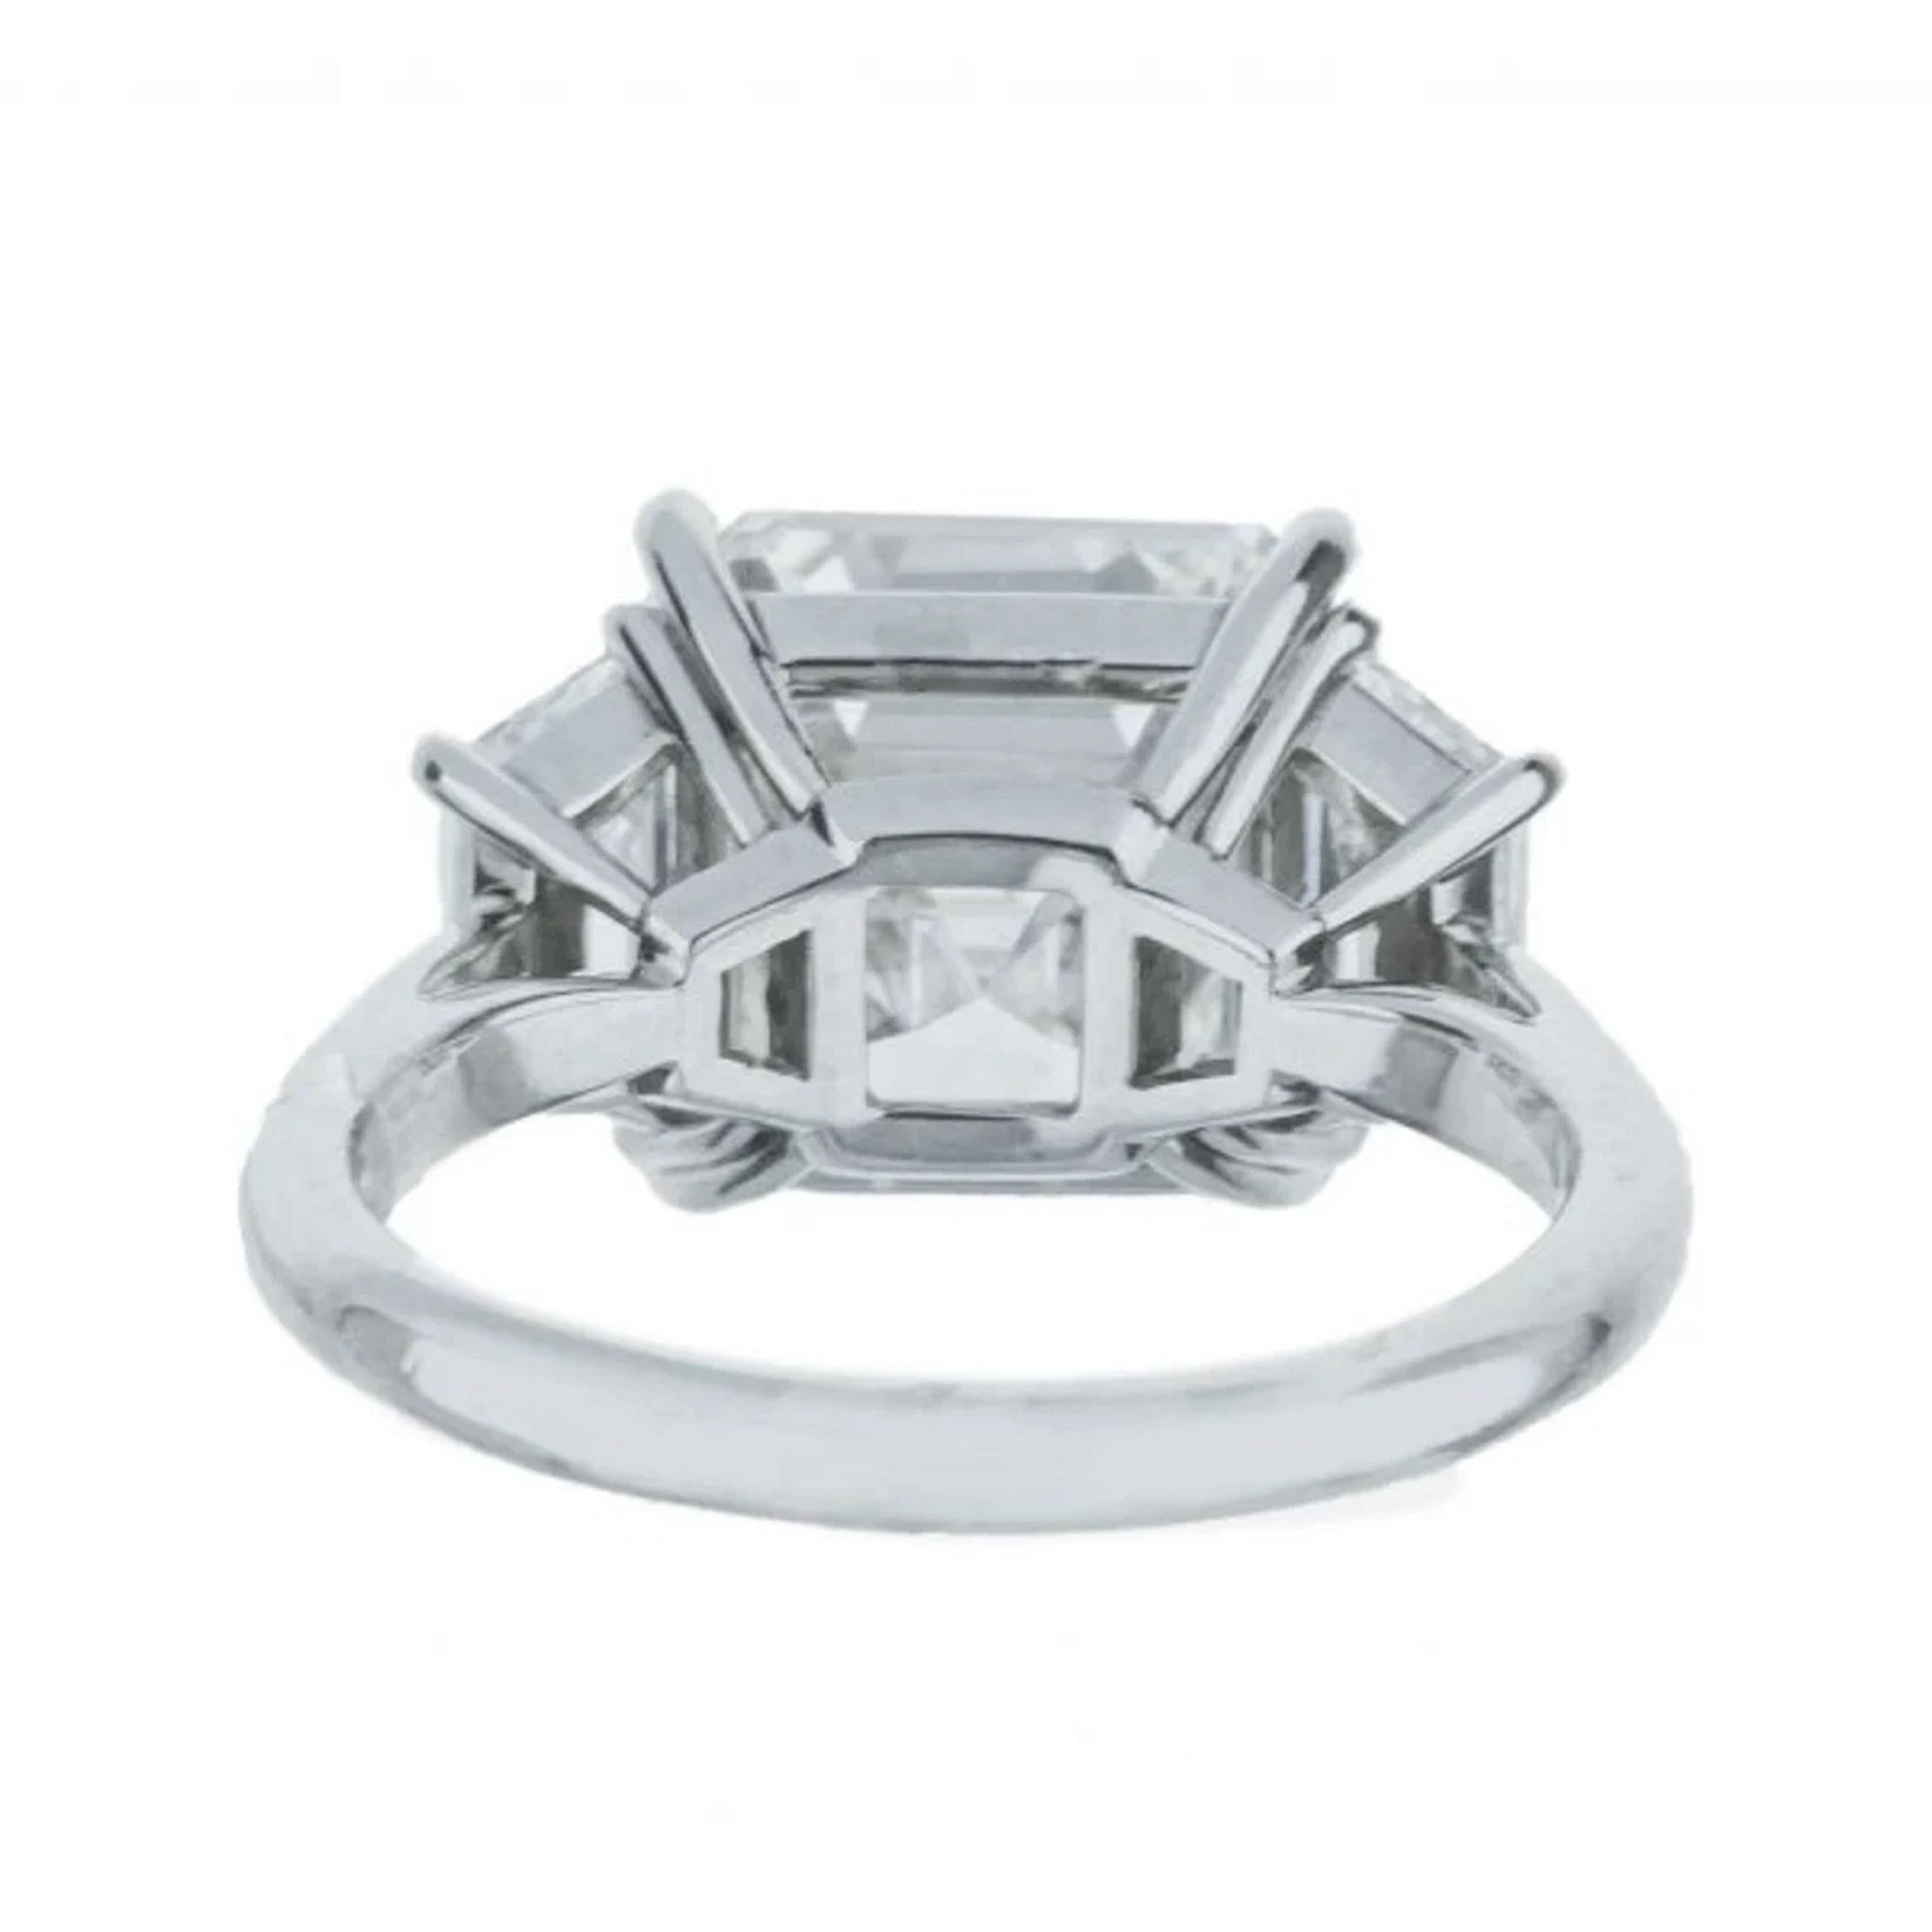 An amazing and clear asscher cut diamond certified by GIA 
4 CARATS
FLAWLESS CLARITY
H COLOR 
EXCELLENT CUT